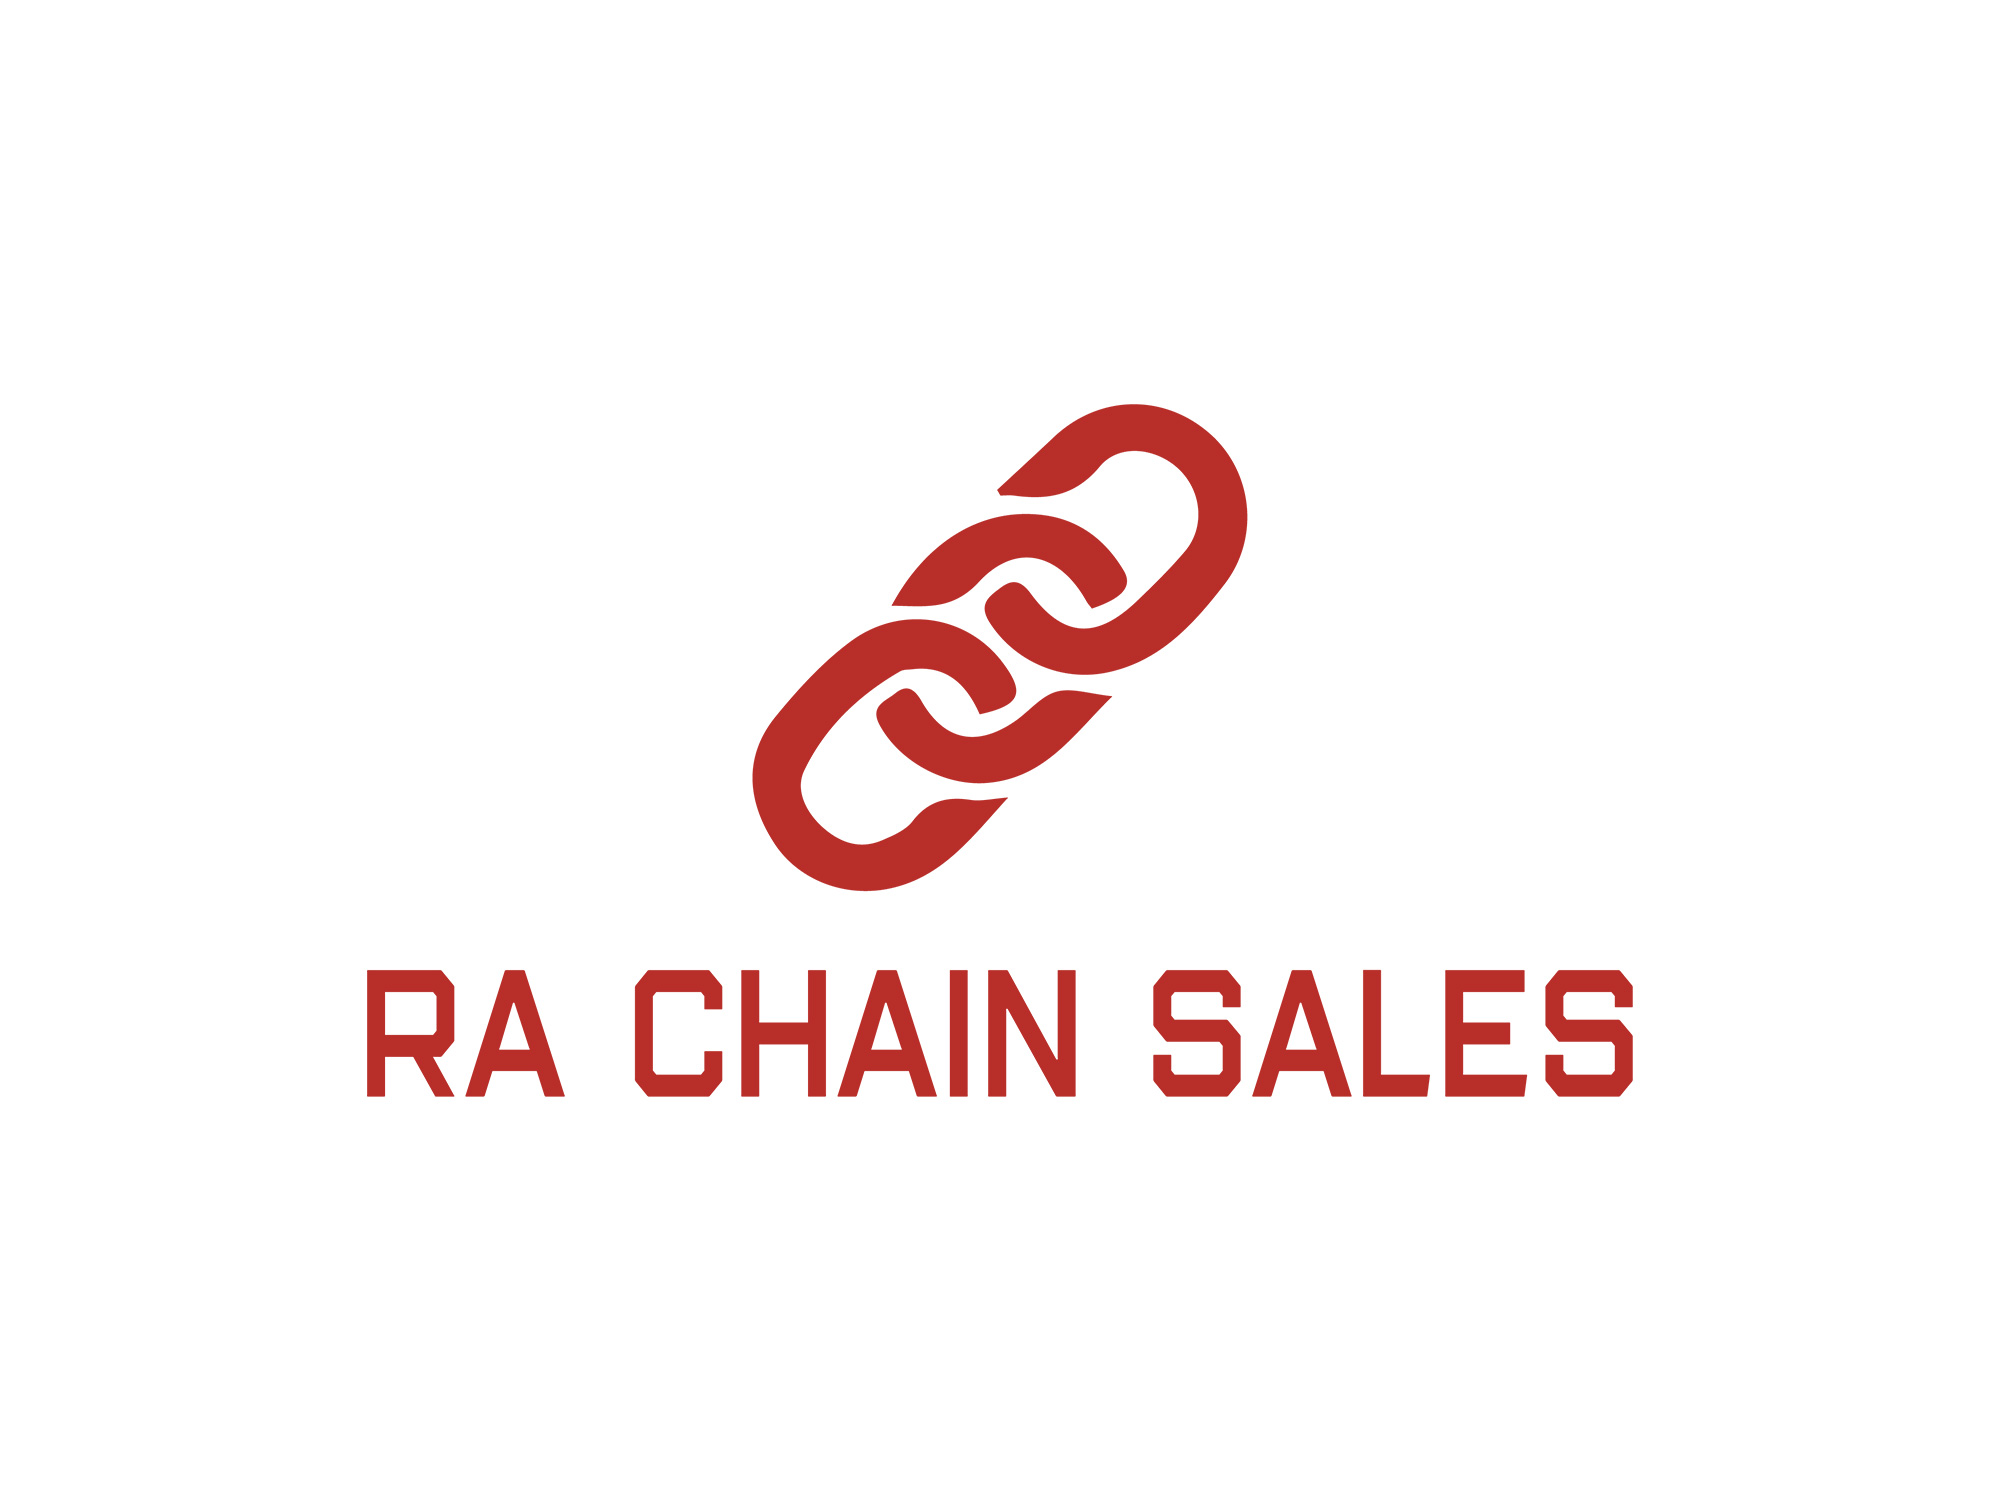 RA Chain 2D Logo Designing - XpertLab Technolgoies Private Limited